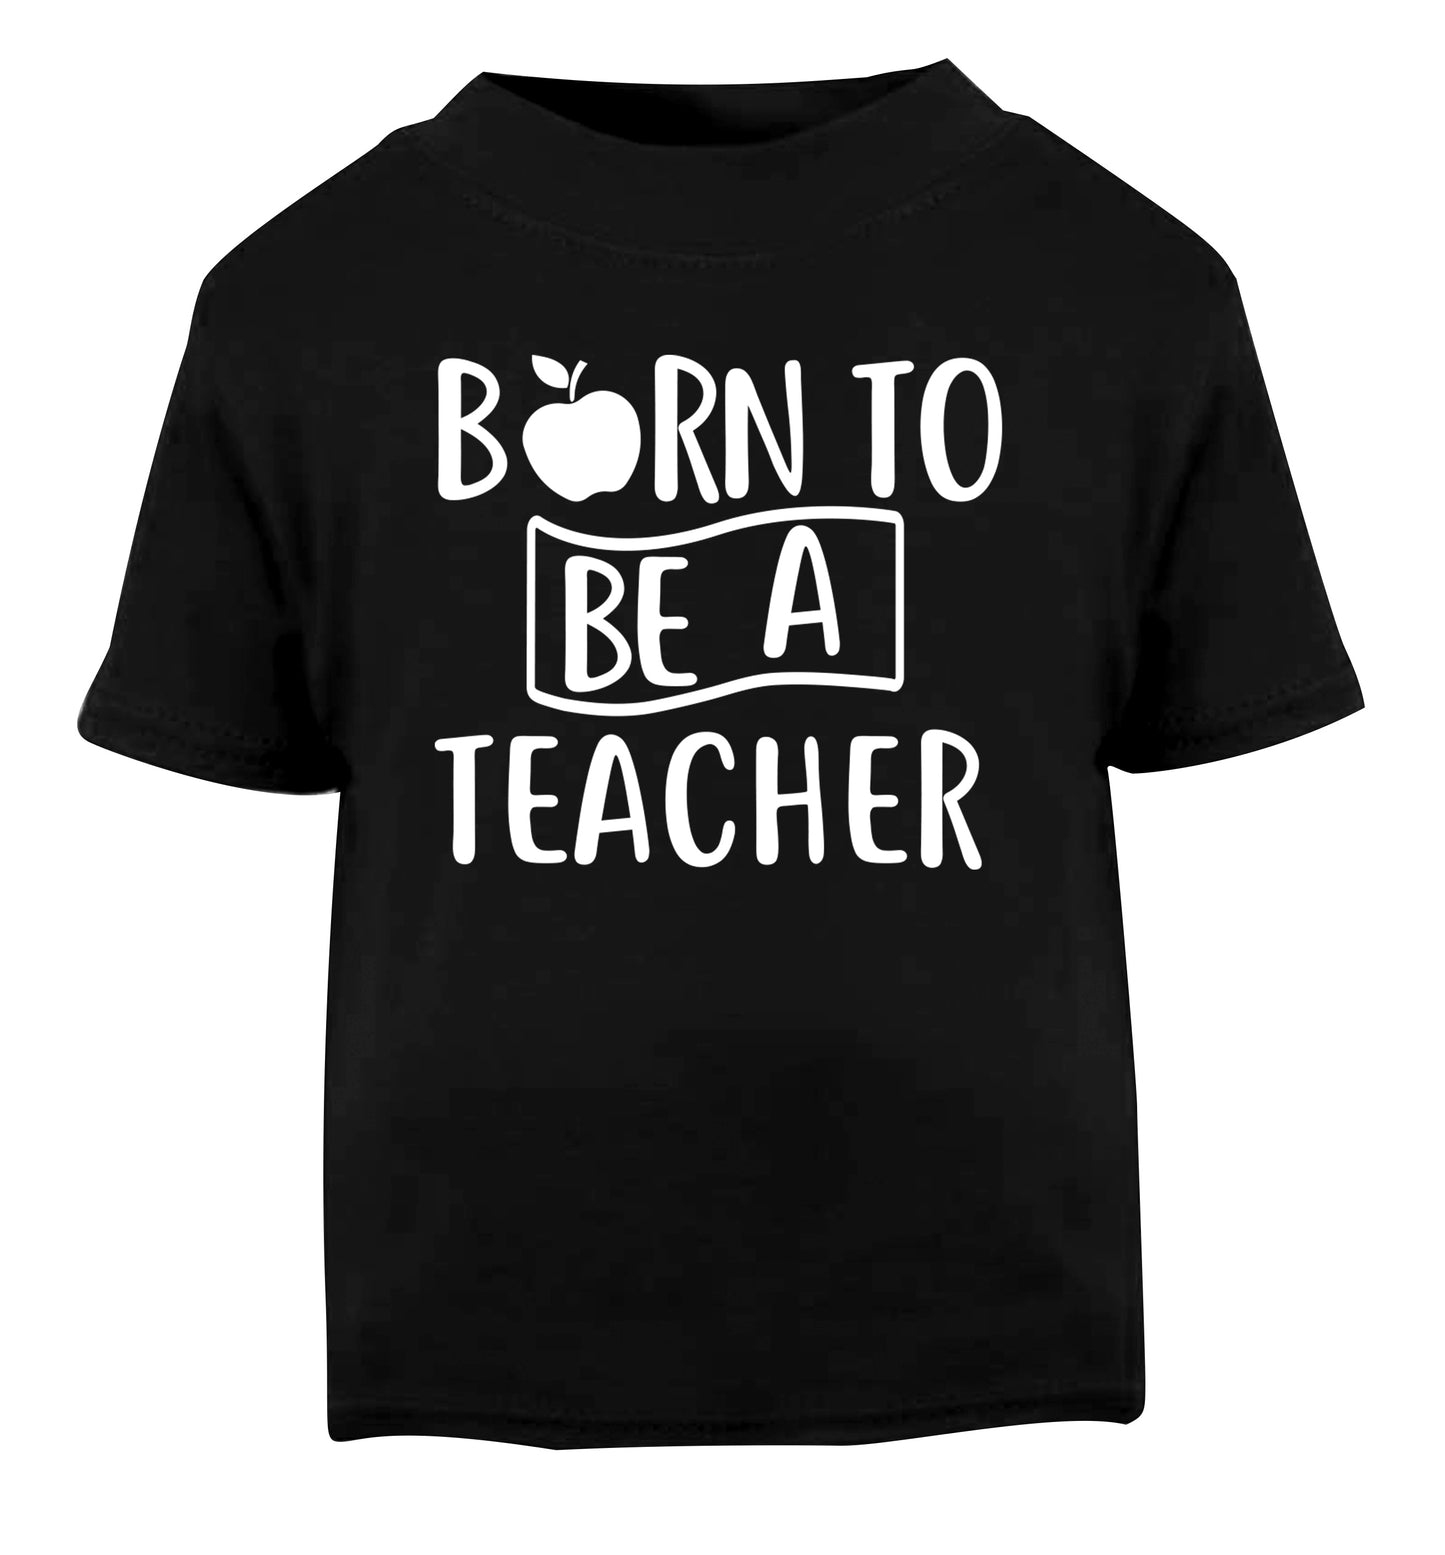 Born to be a teacher Black Baby Toddler Tshirt 2 years